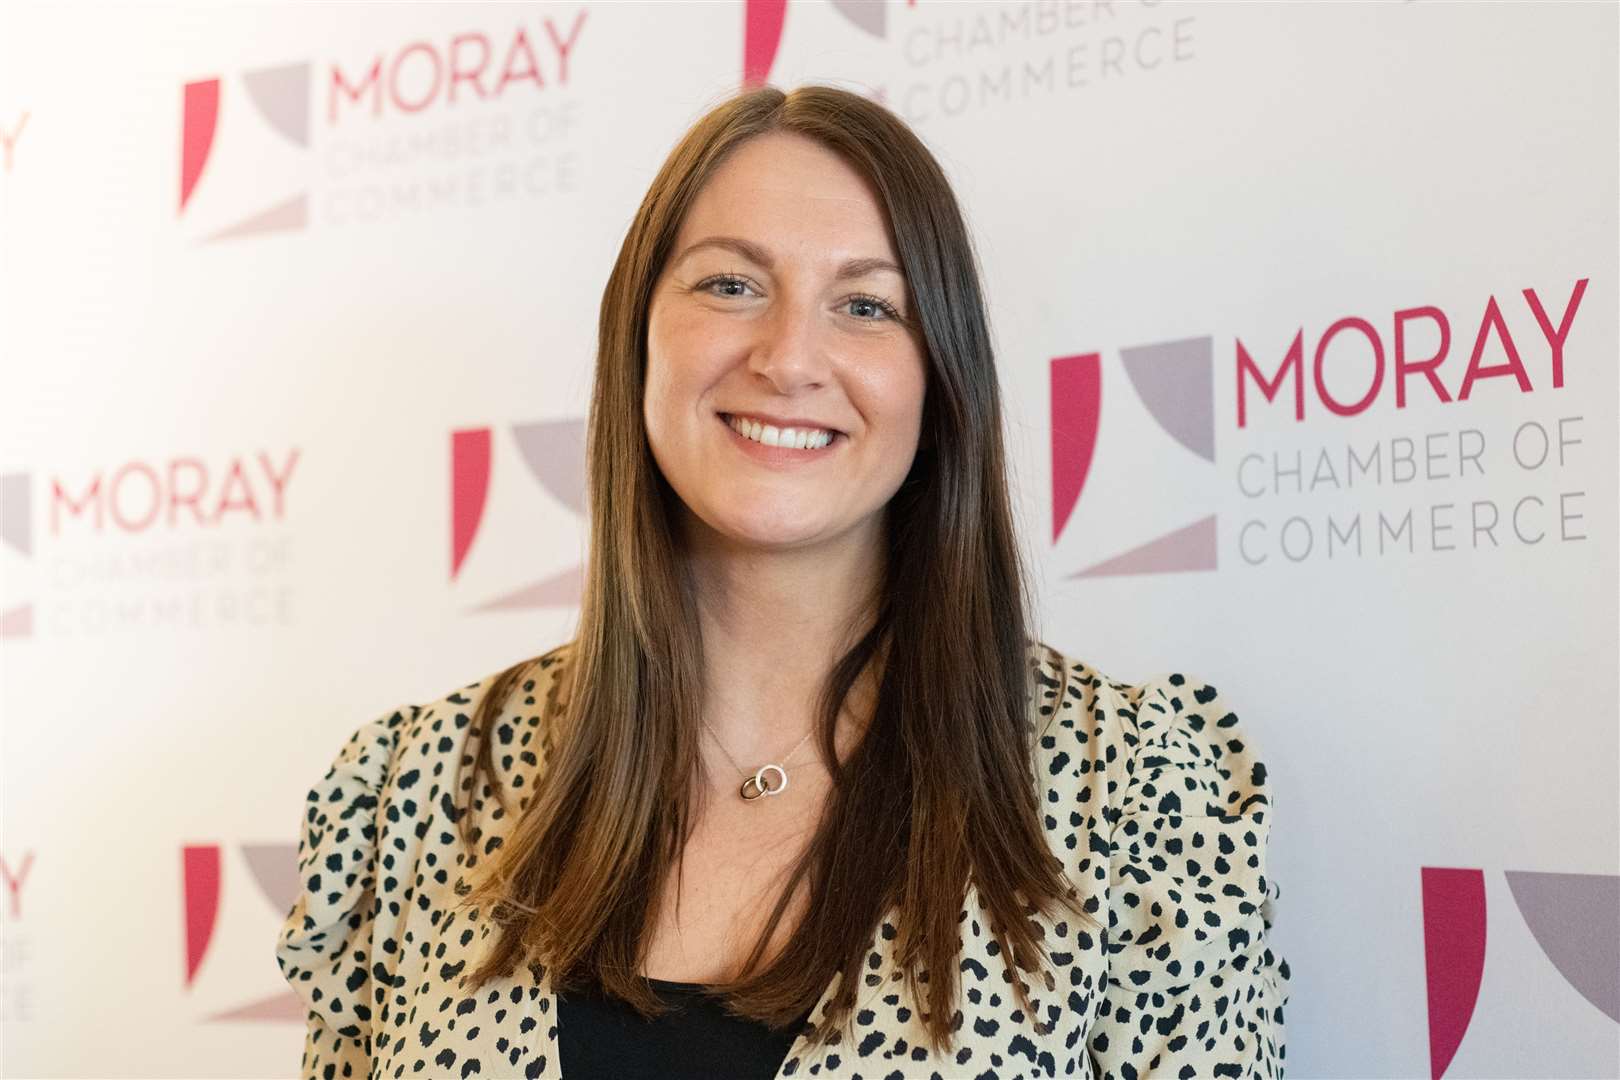 Chief Executive Officer of Moray Chamber of Commerce Sarah Medcraf.Picture: Daniel Forsyth